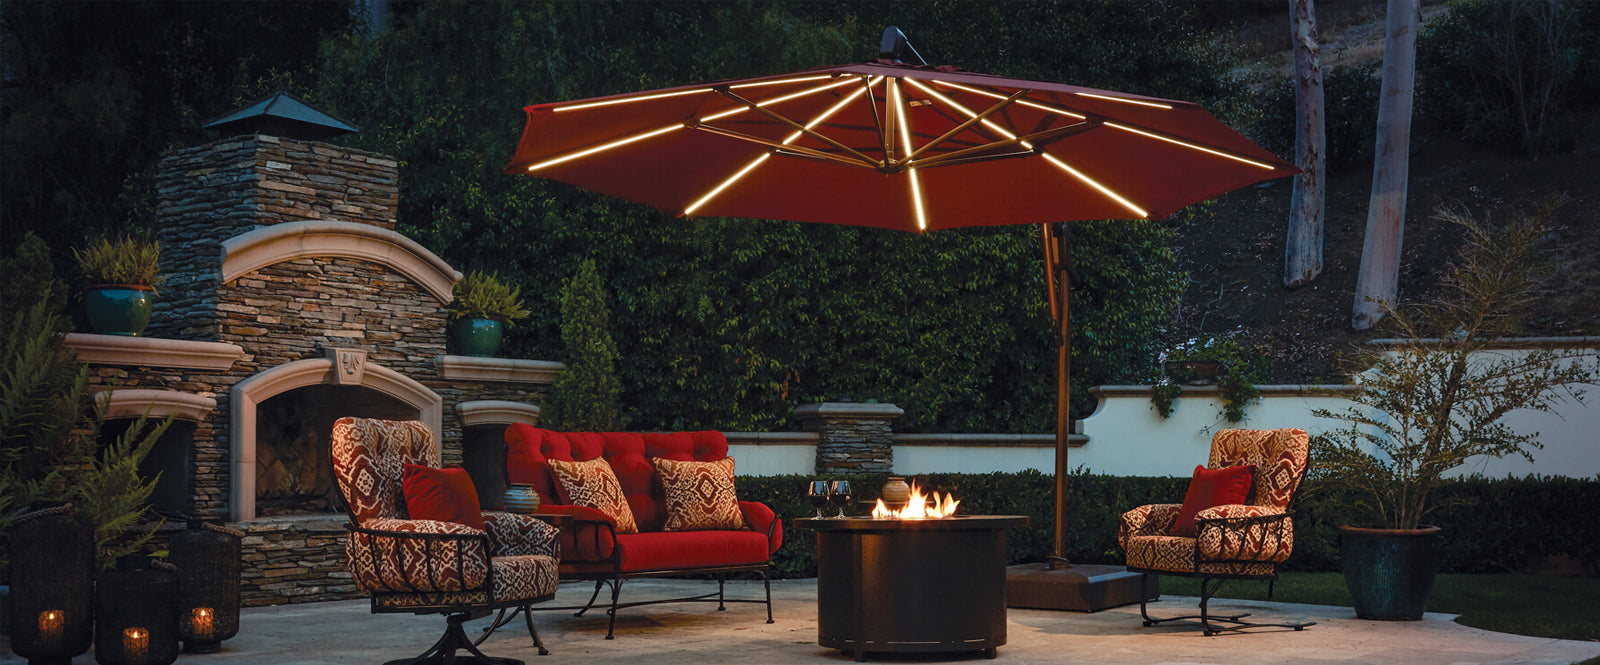 Stylish outdoor patio accessories to compliment any style. From Umbrellas to Firepits, Hammocks and more!